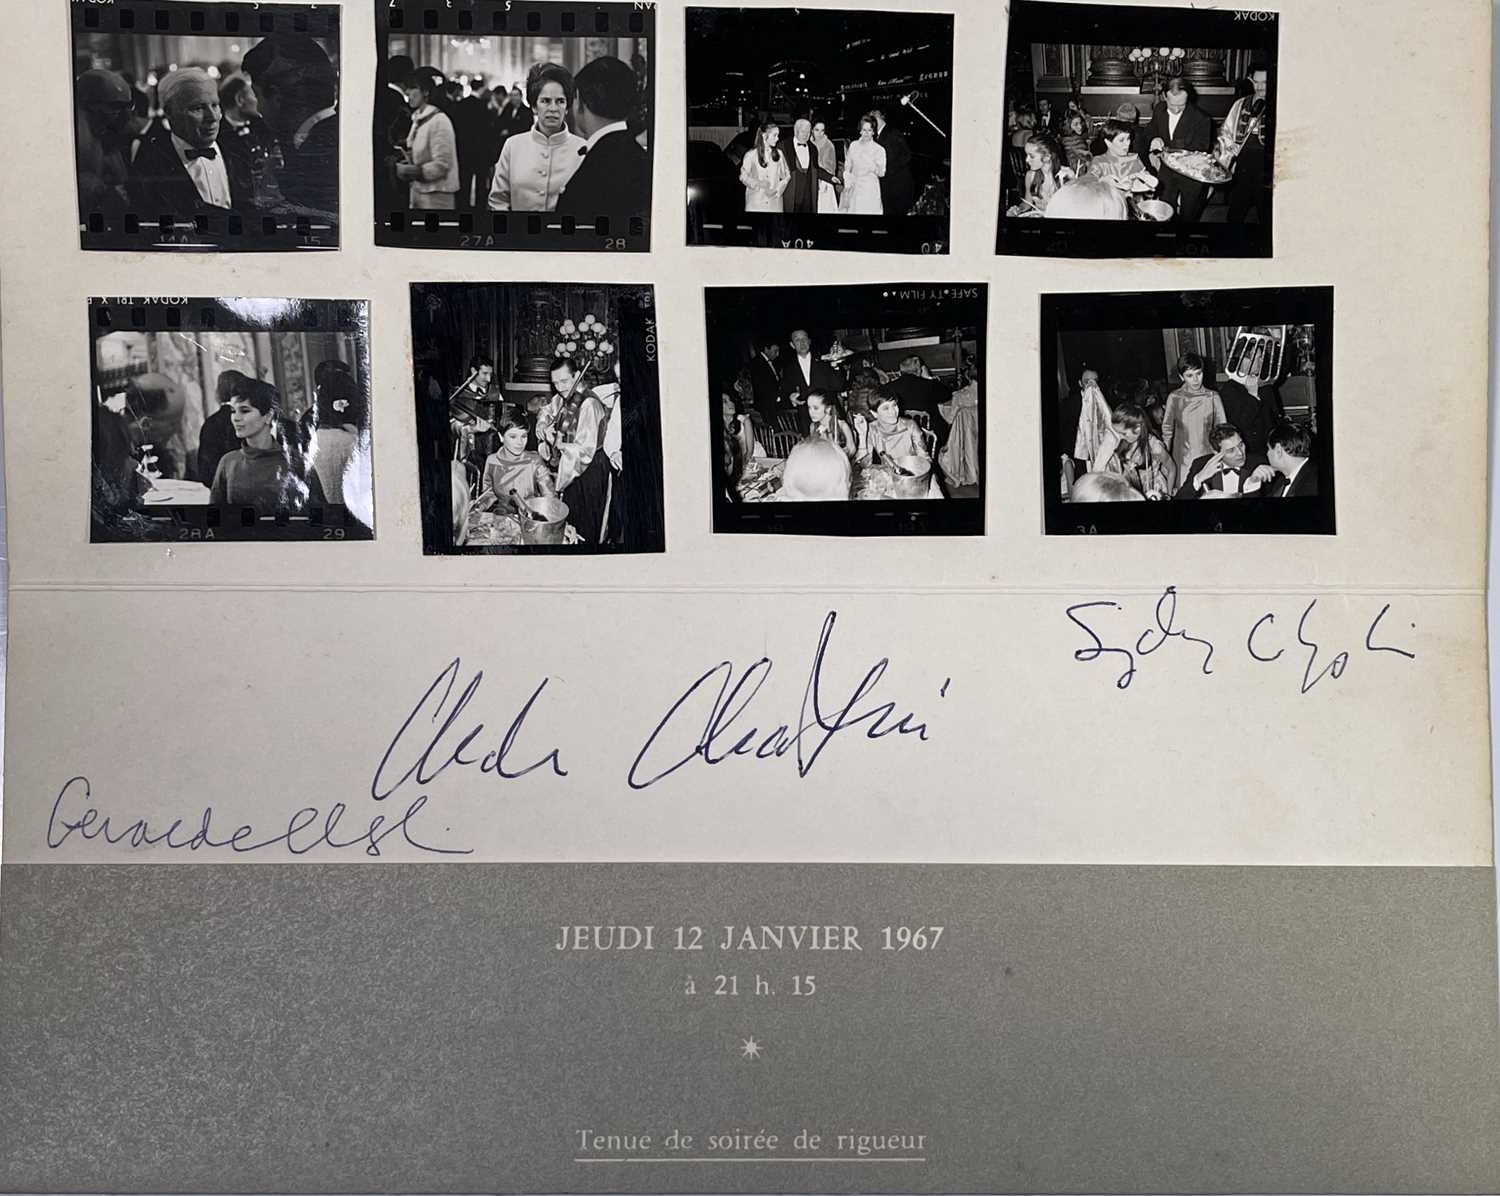 CHARLIE CHAPLIN - SIGNED CARD AND ORIGINAL IMAGES FROM 1967 GALA DINNER. - Image 2 of 4